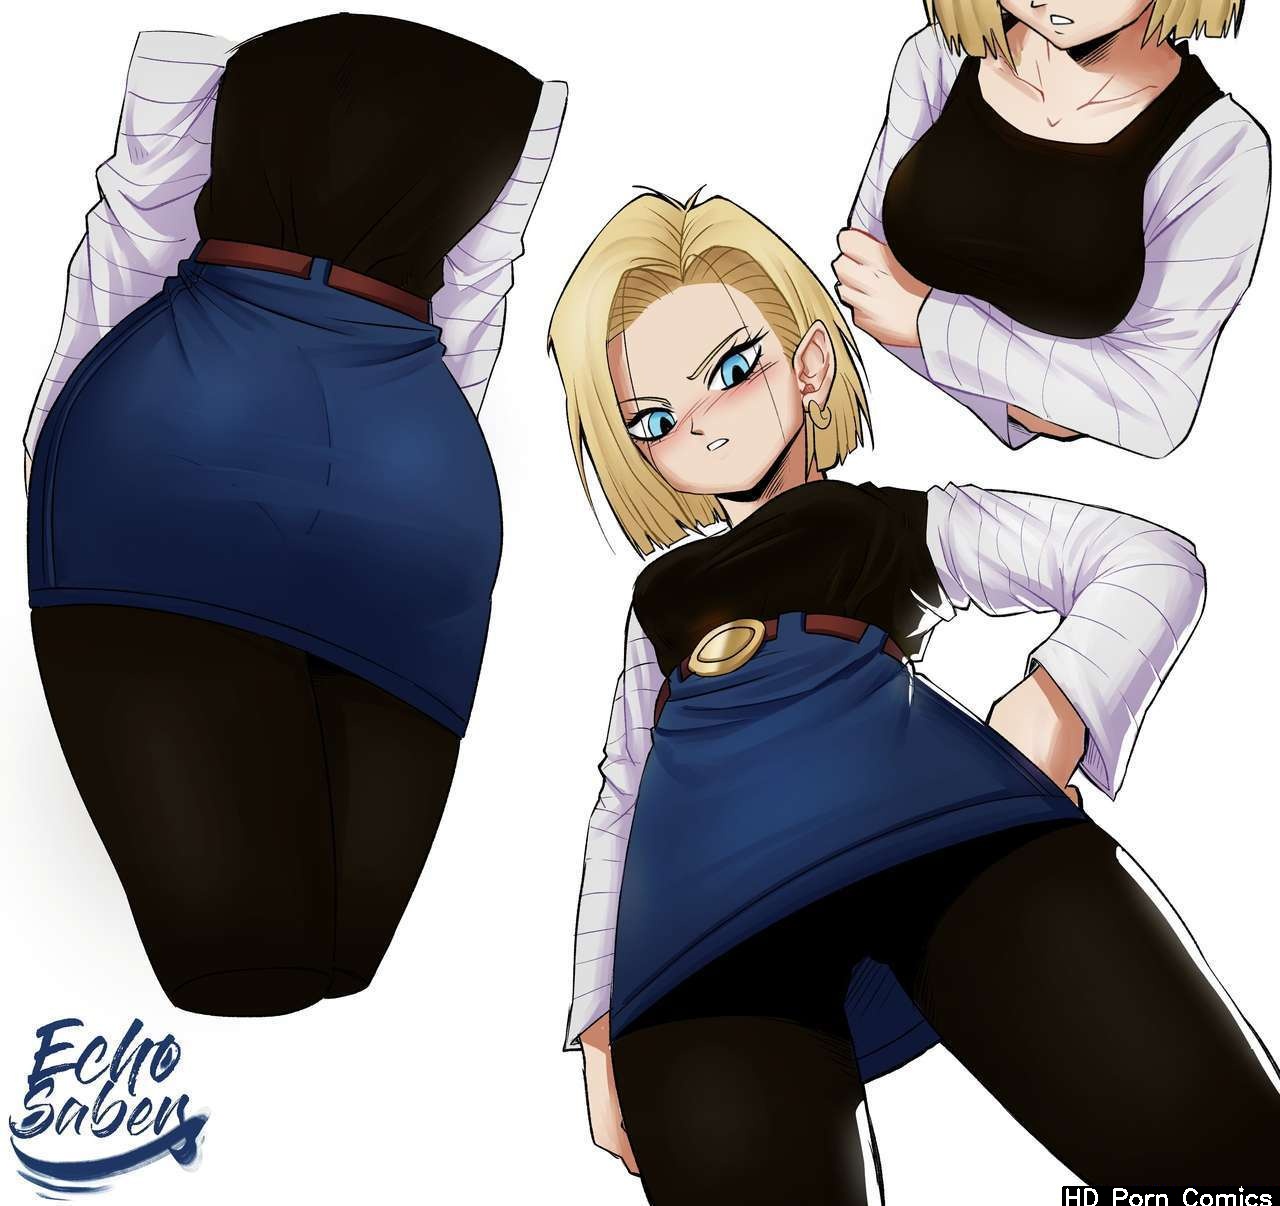 1280px x 1206px - Android 18 Mini - Body Swapping With A Weakling comic porn - HD Porn Comics